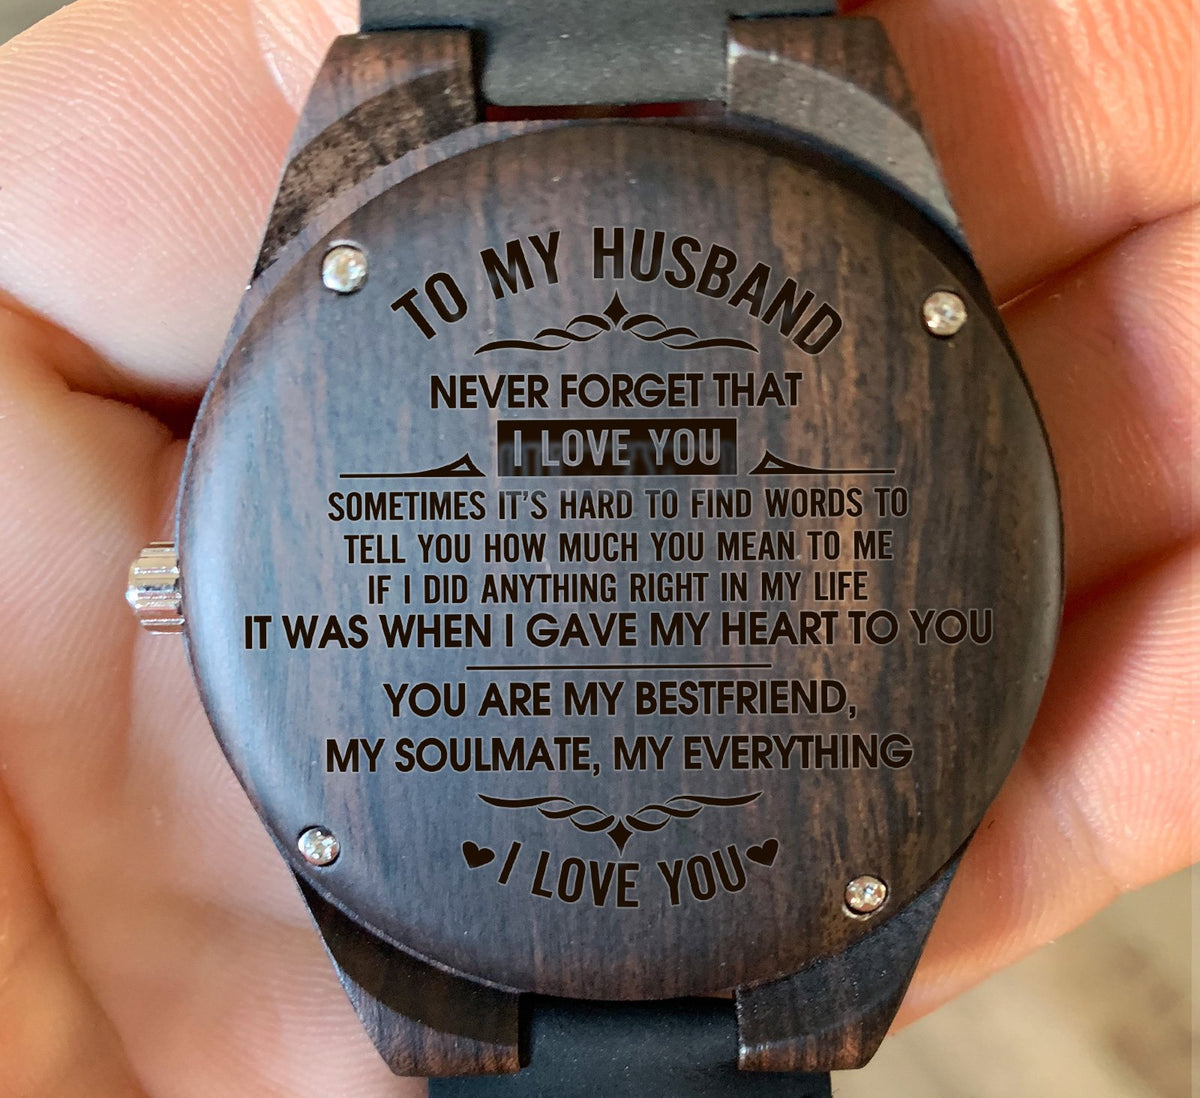 To My Husband - Never Forget That I LOVE YOU - Wooden Watch